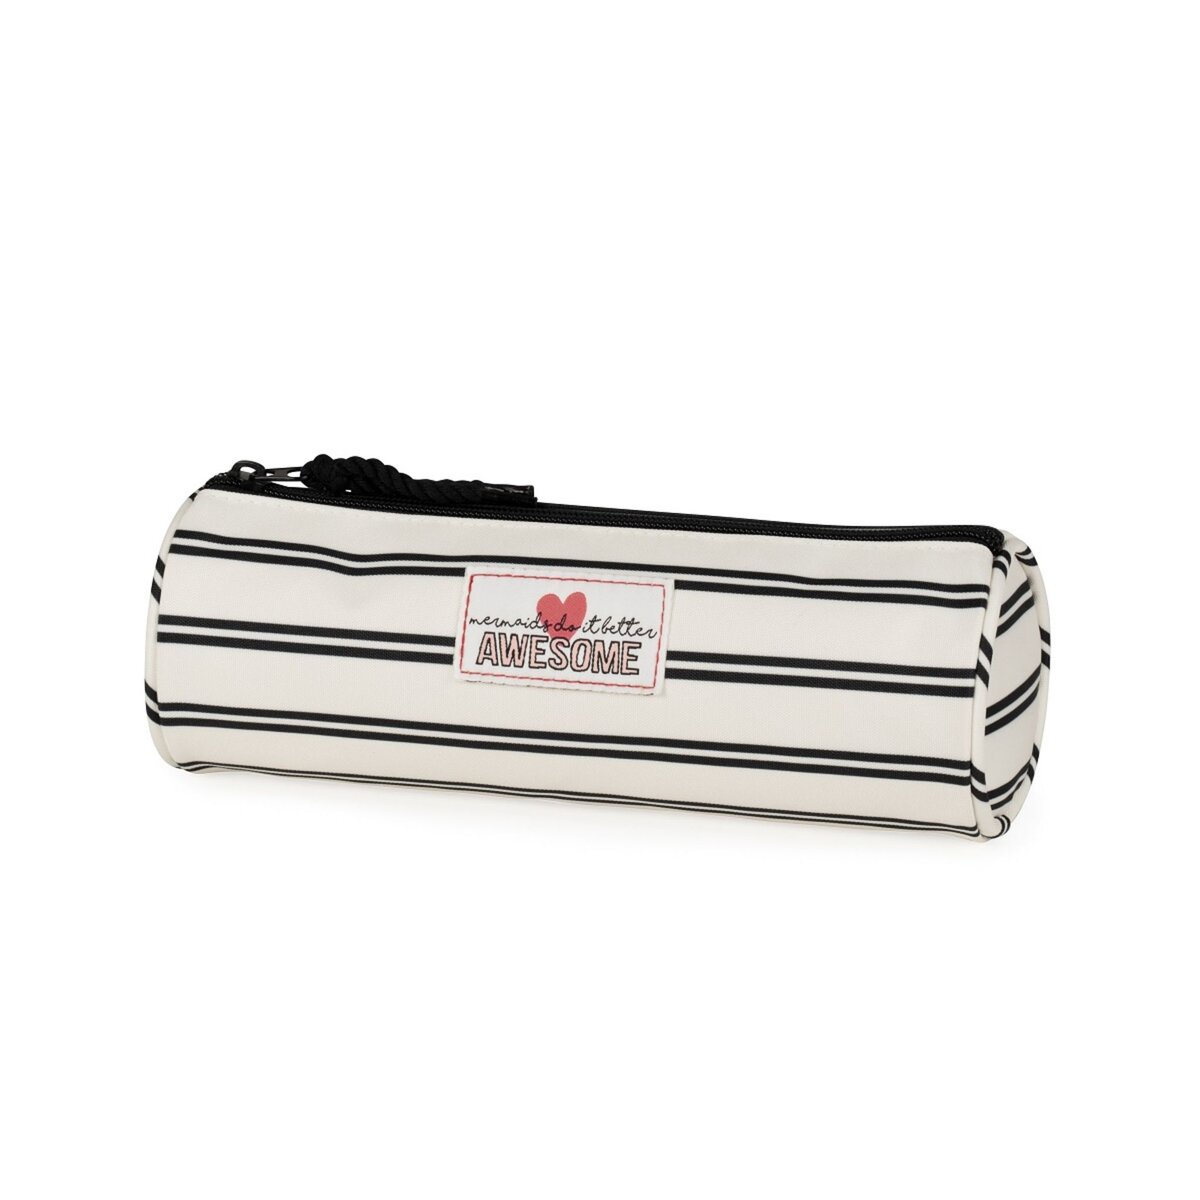 Trousse ronde fille AWESOME - Blanc rayures noires